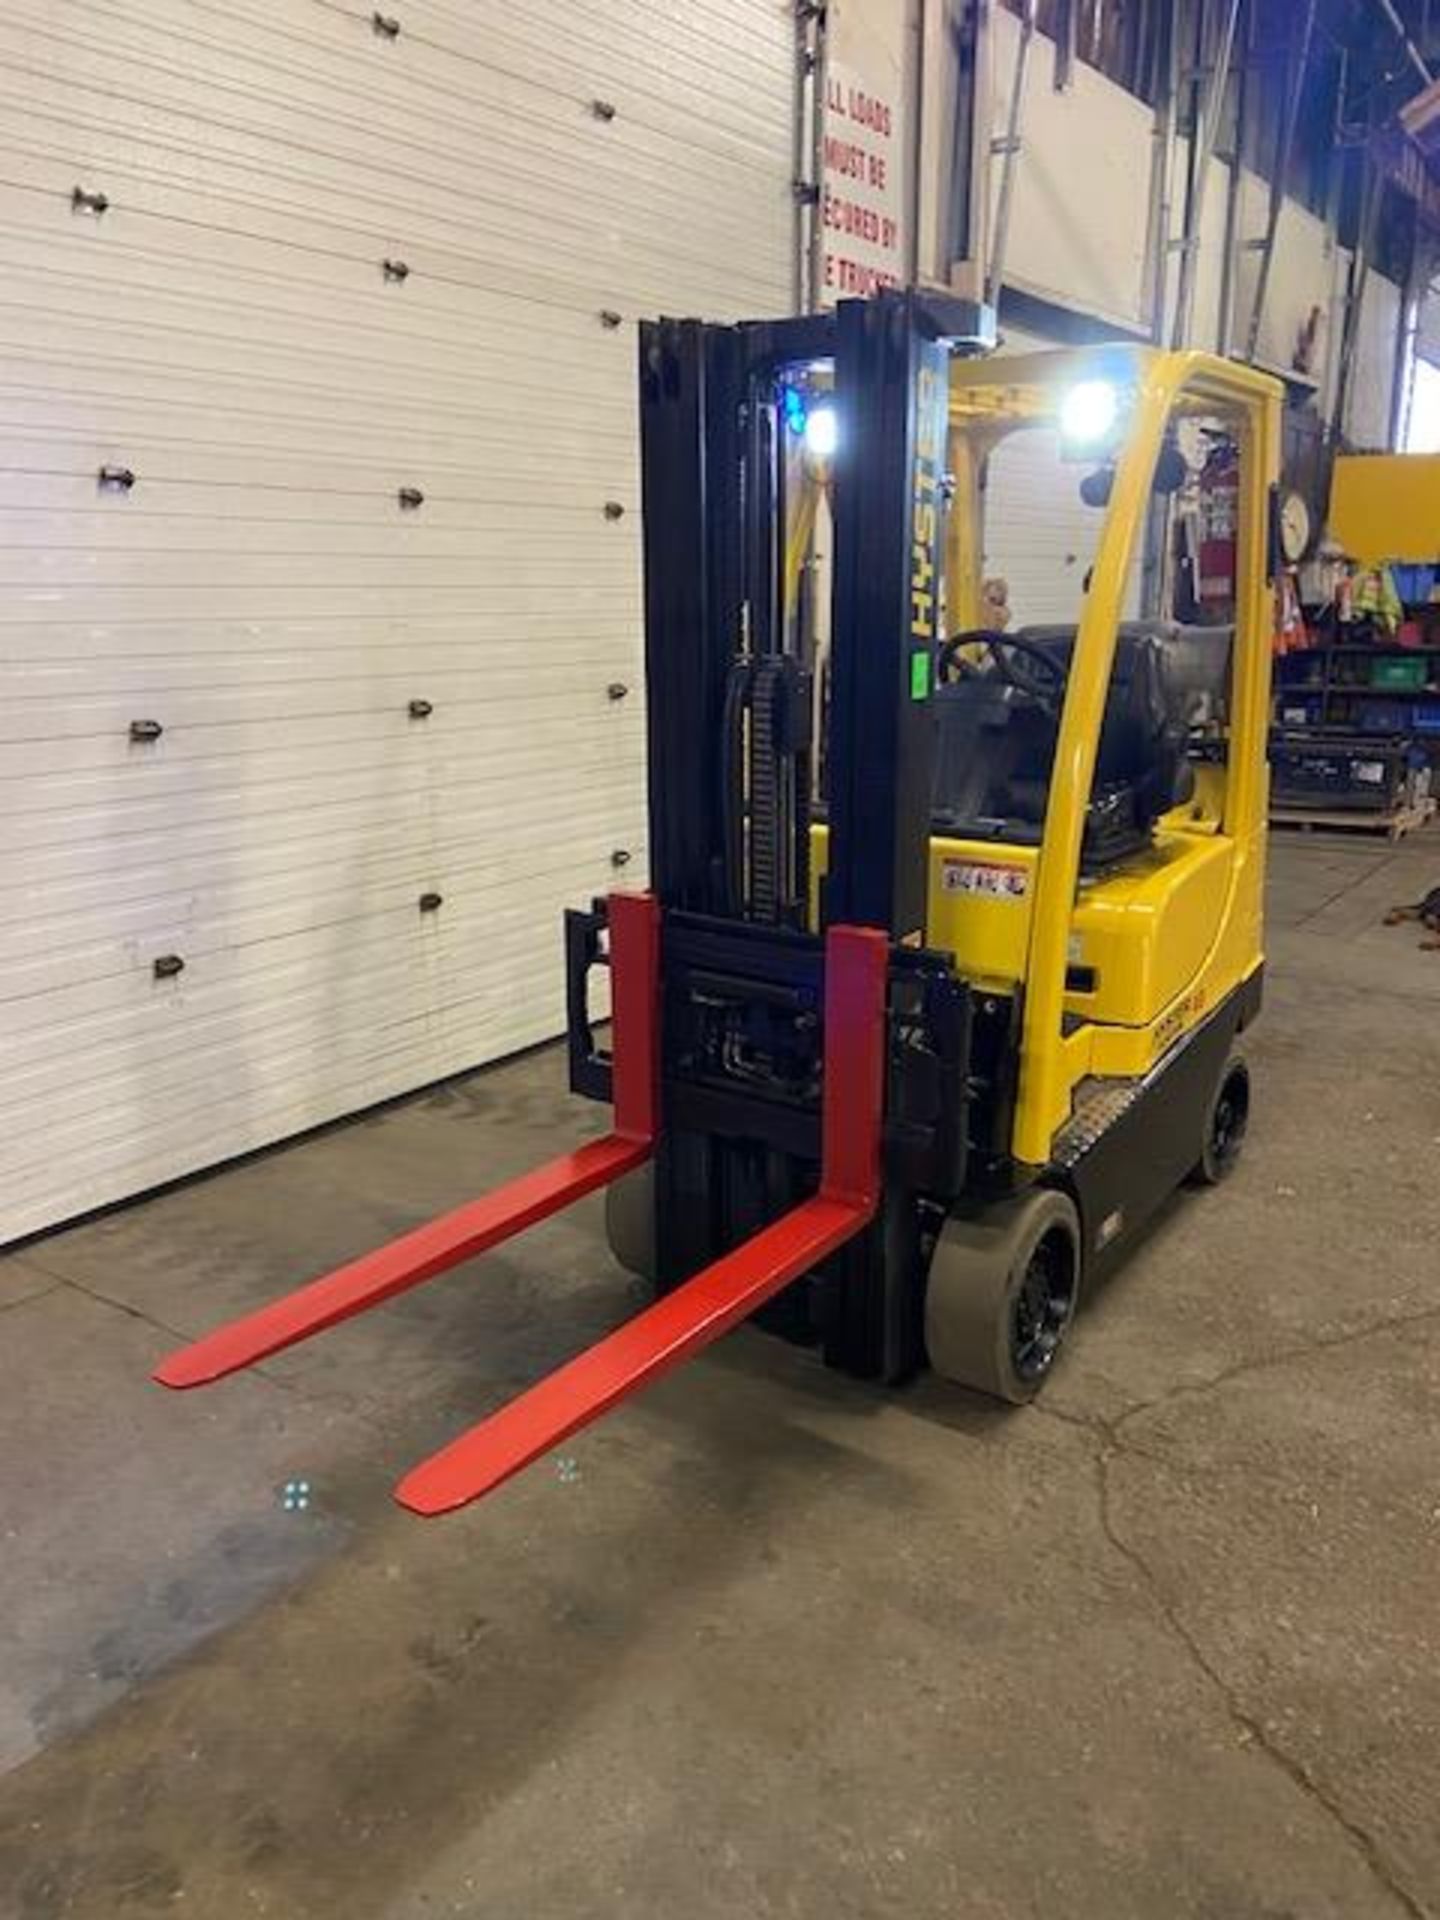 FREE CUSTOMS - 2016 Hyster 4,000lbs Capacity Forklift LPG (propane) with 3-stage mast & sideshift ( - Image 2 of 3